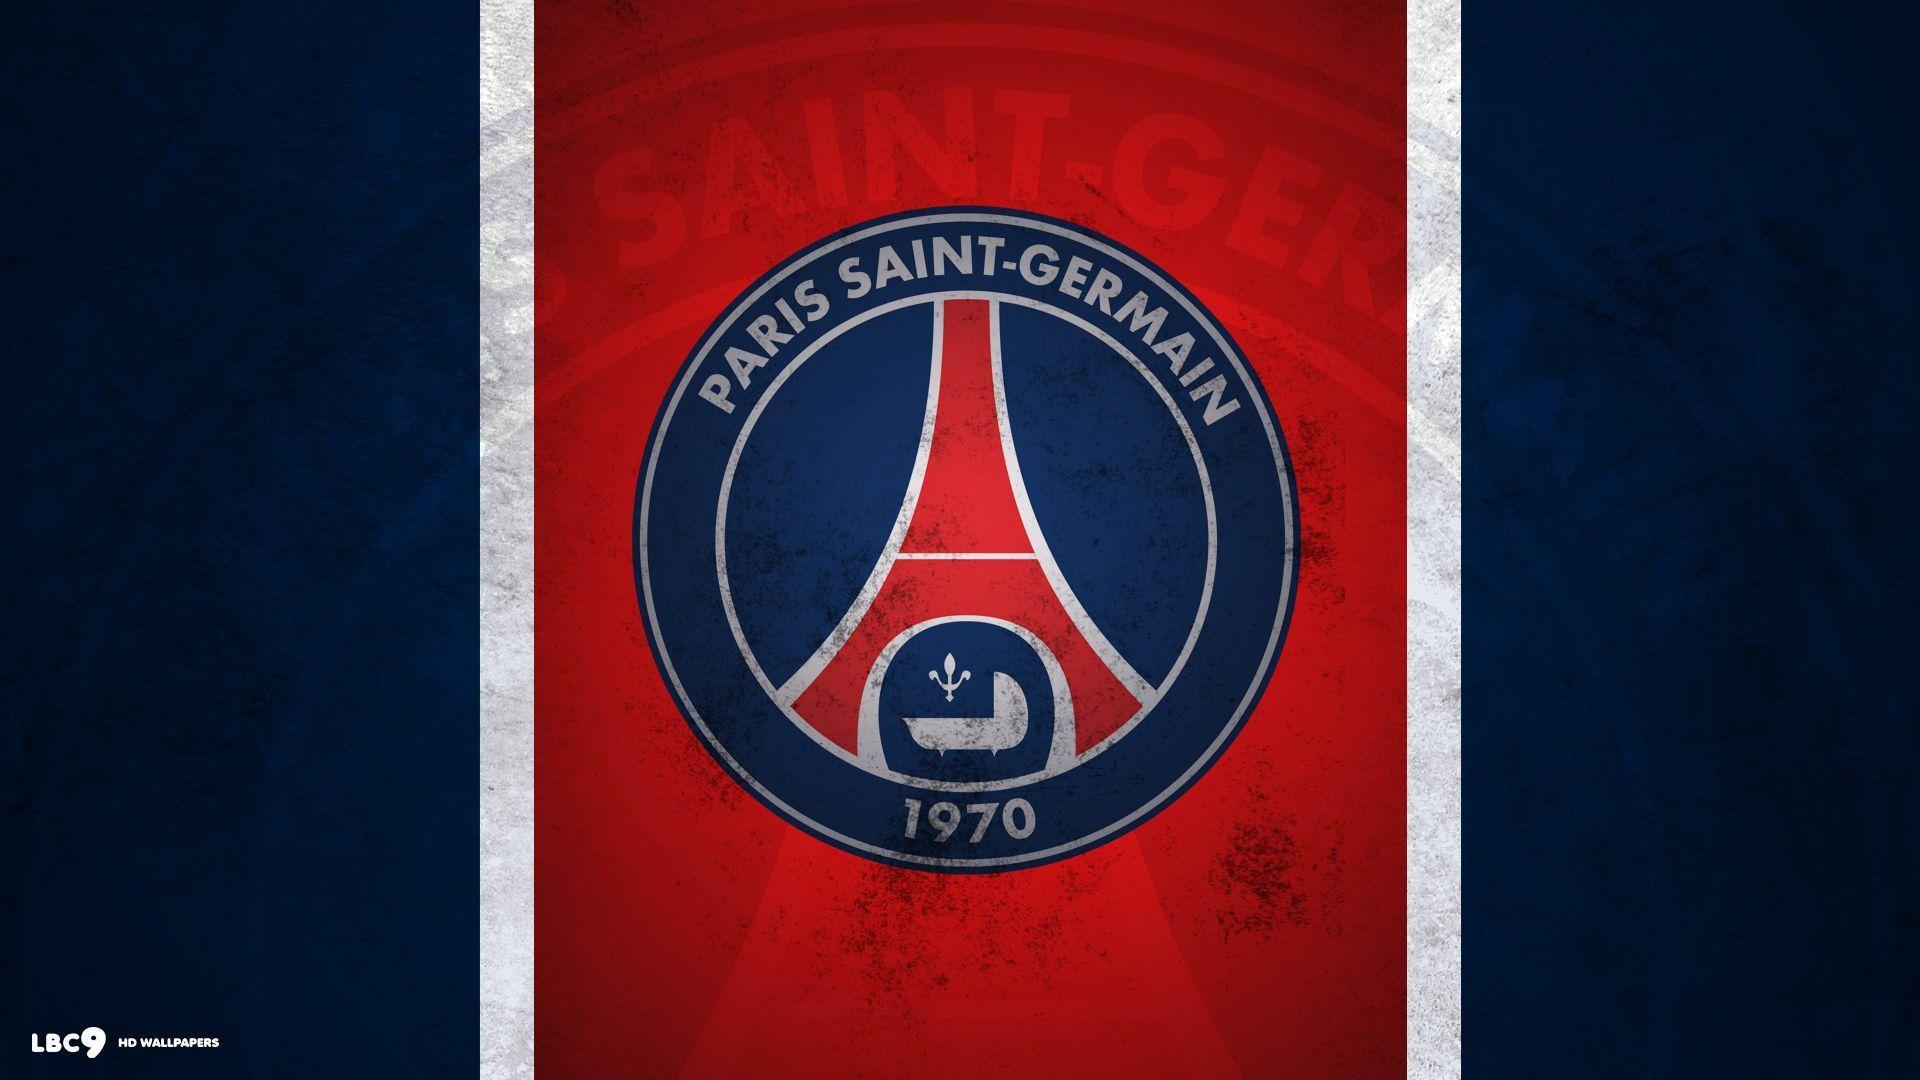 Psg Wallpaper 1 1. Clubs HD Background